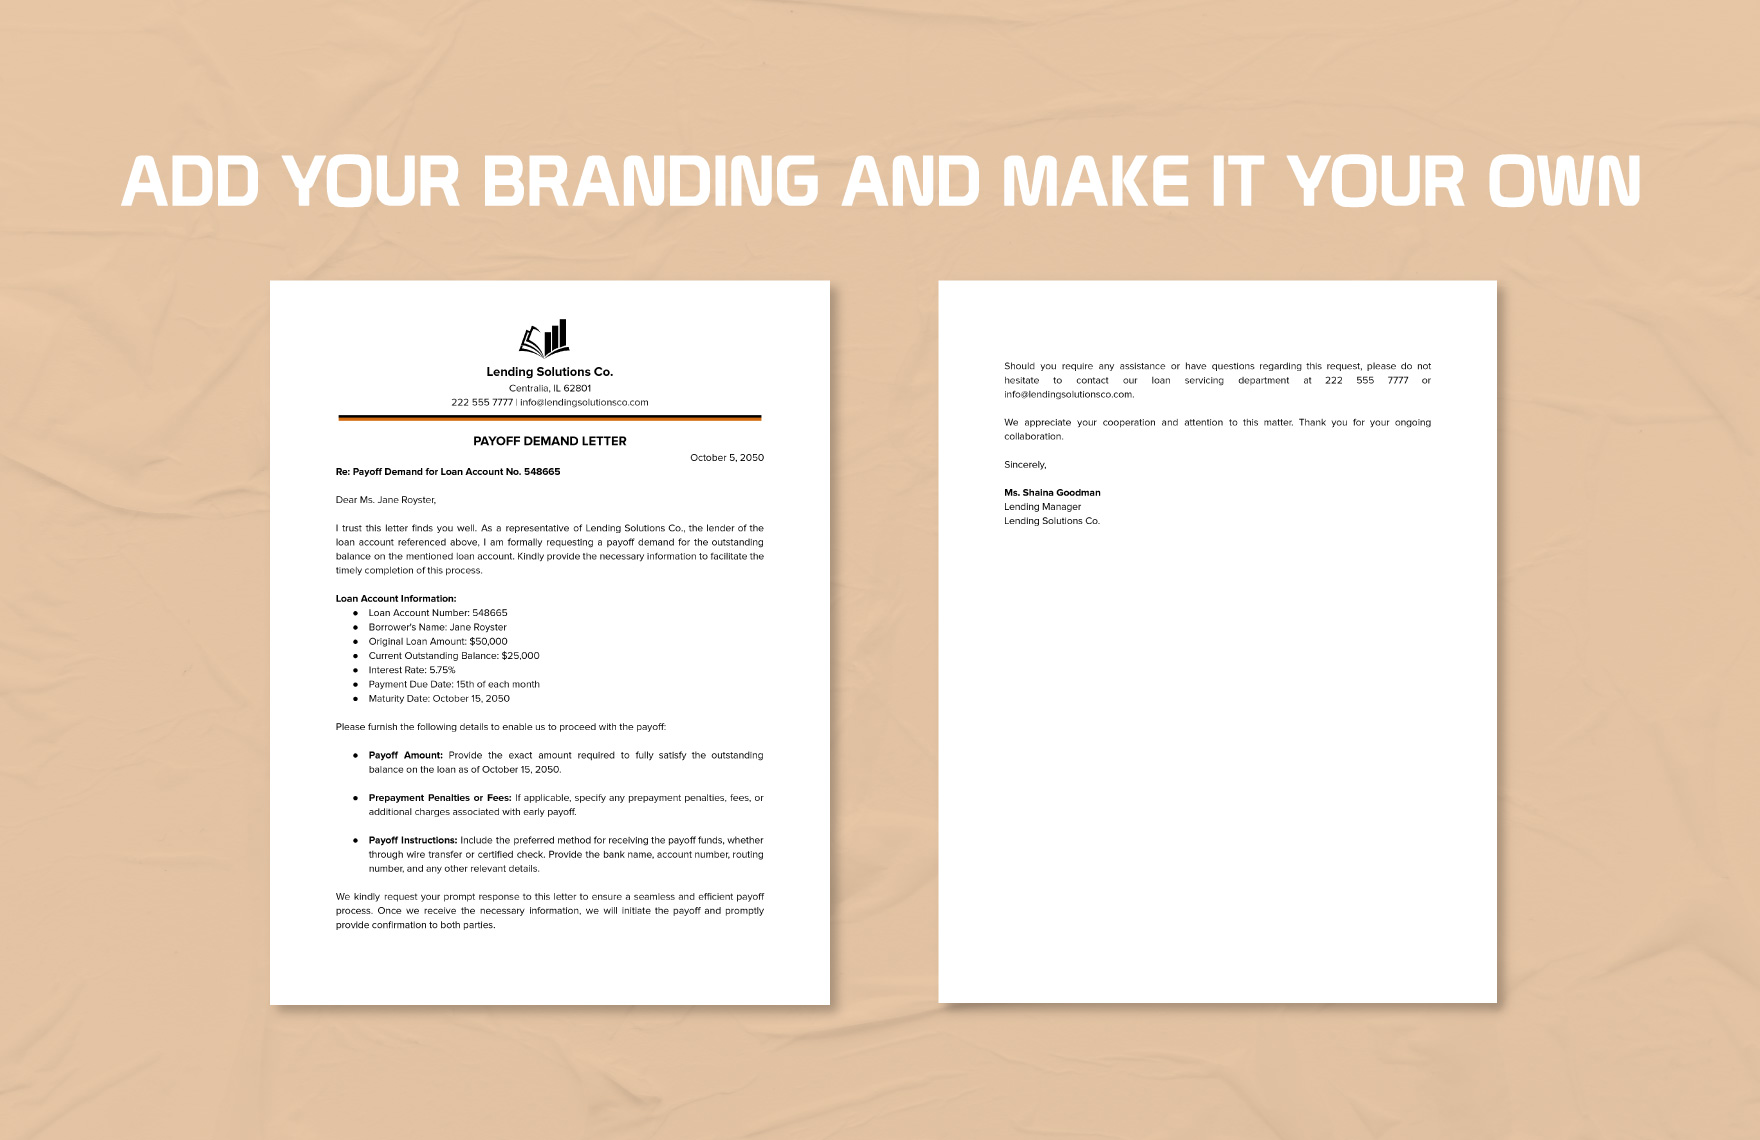 Sample Payoff Demand Letter Template